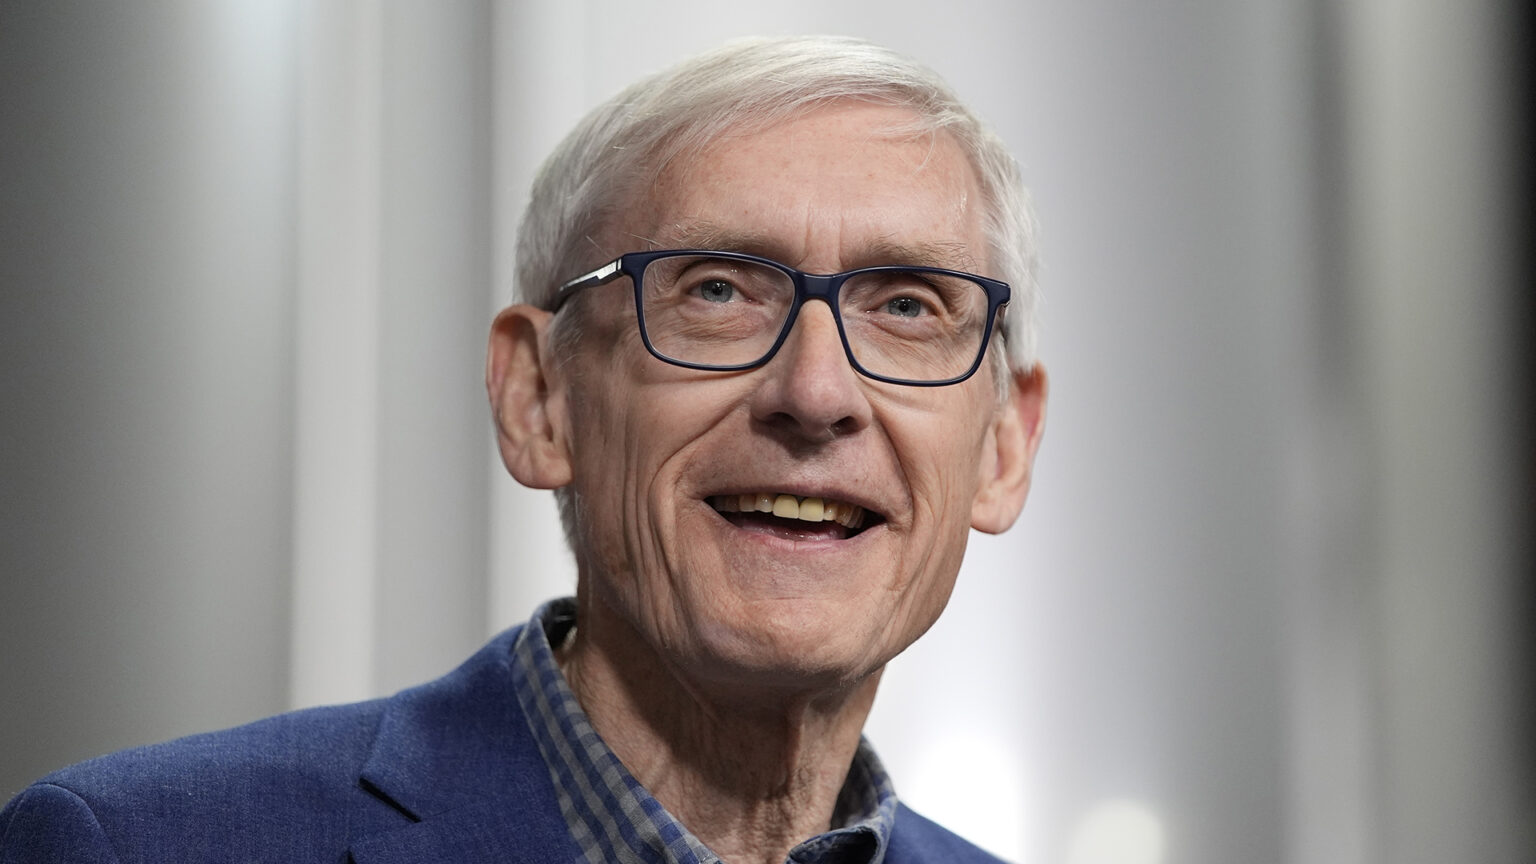 Tony Evers smiles while speaking, with out-of-focus fermentation tanks in the background.